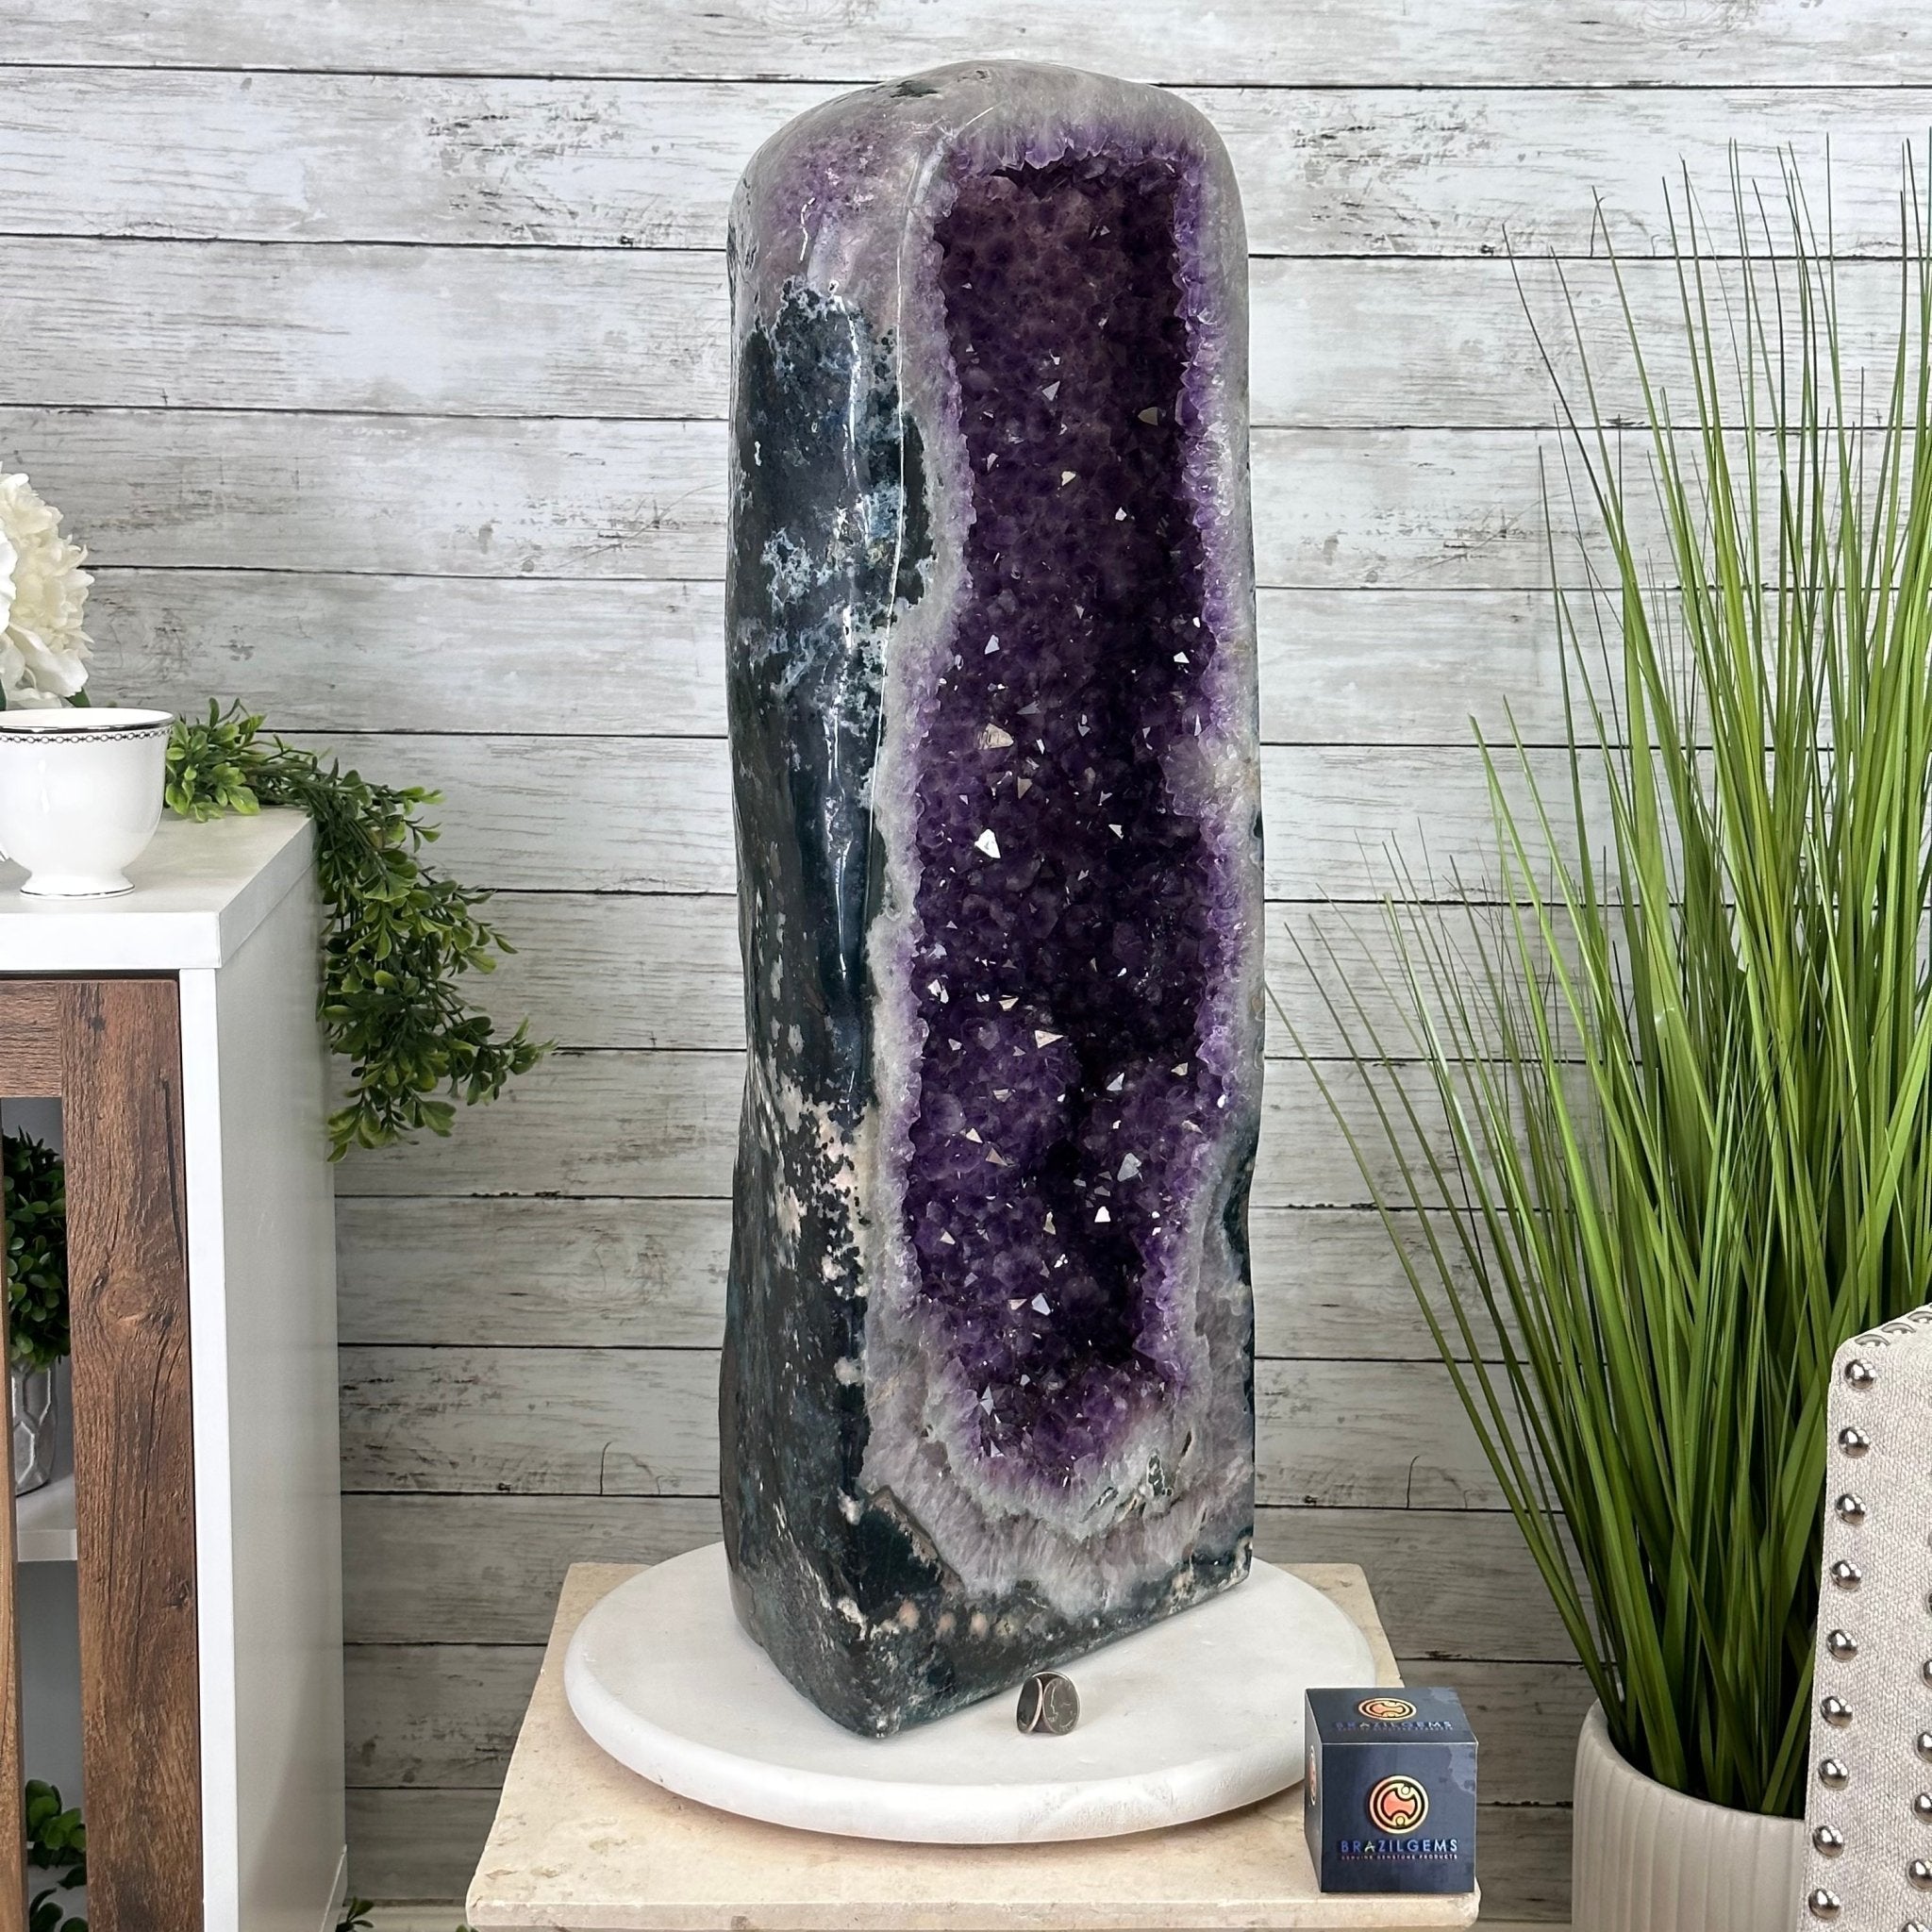 Extra Plus Quality Polished Brazilian Amethyst Cathedral, 96.2 lbs & 27.75" tall Model #5602-0057 by Brazil Gems - Brazil GemsBrazil GemsExtra Plus Quality Polished Brazilian Amethyst Cathedral, 96.2 lbs & 27.75" tall Model #5602-0057 by Brazil GemsPolished Cathedrals5602-0057